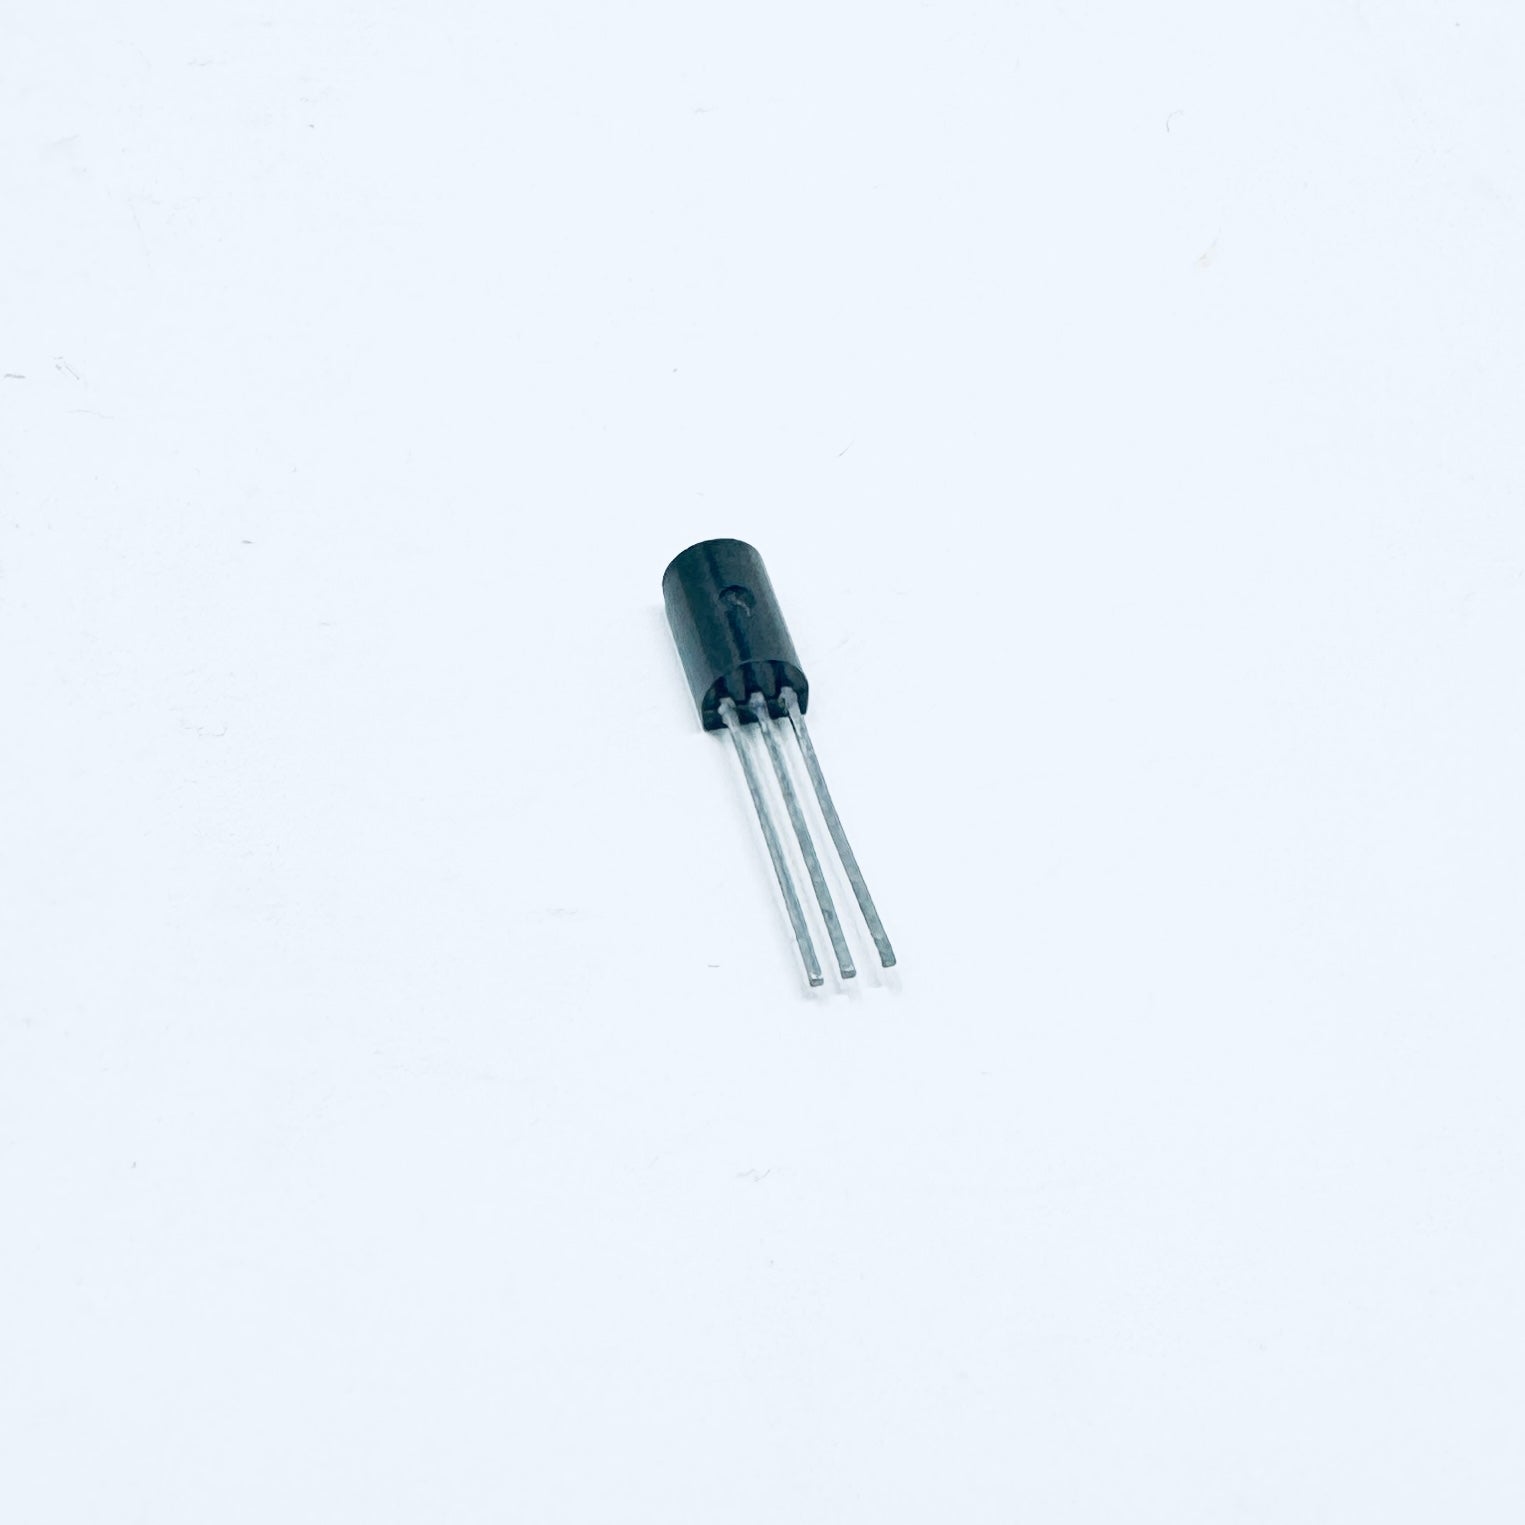 Authentic Fender MPSW42 TO-92L Transistor, authentic fender part replacement